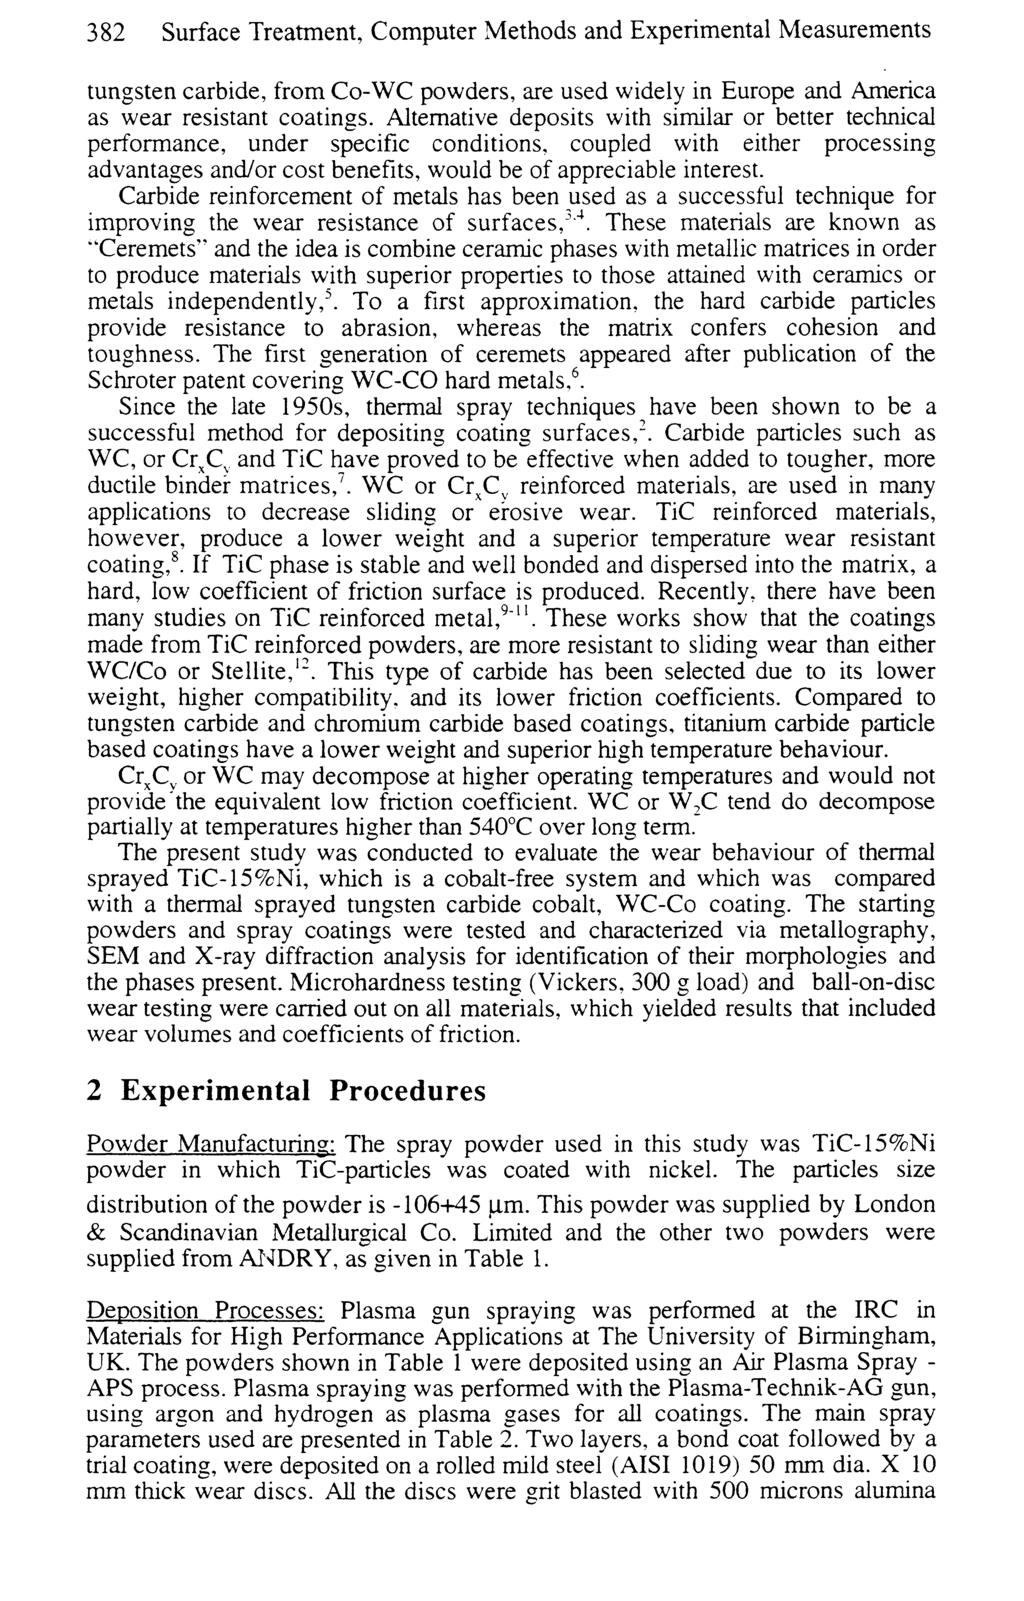 382 Transactions Surface on Treatment, Engineering Sciences Computer vol 17, Methods 1997 WIT Press, and www.witpress.